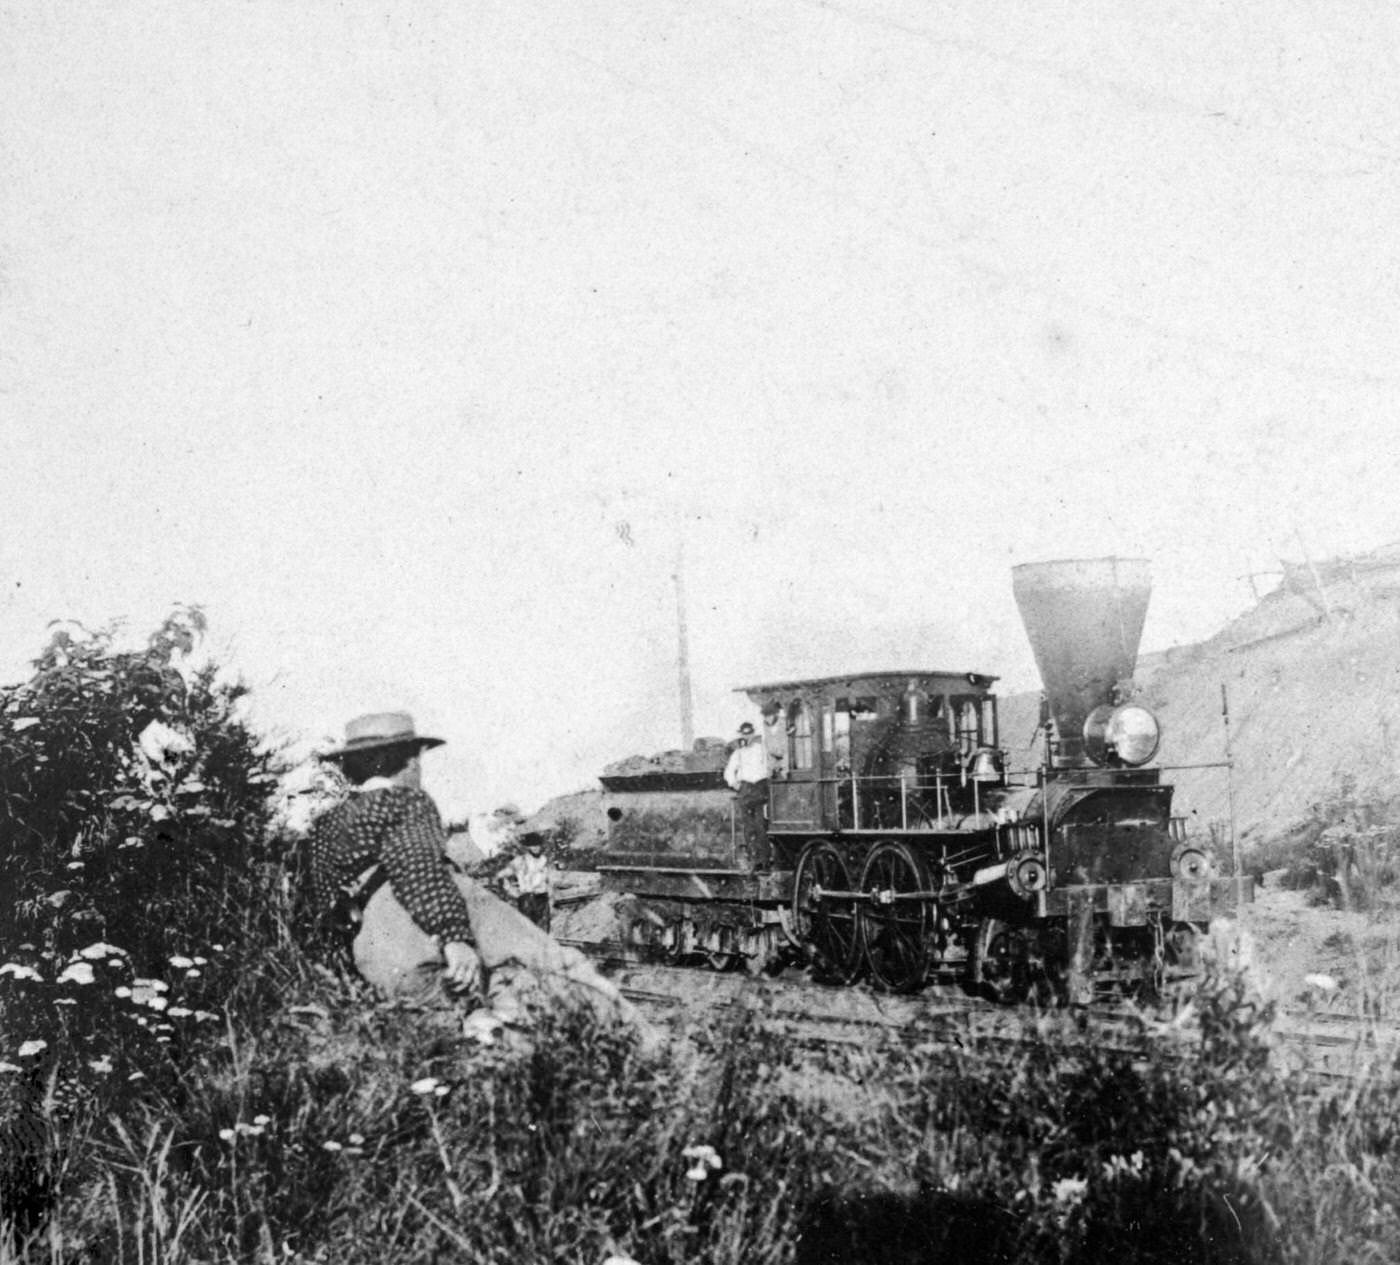 View of a man as he watches a locomotive pass on the Orange and Alexandria Railroad, Alexandria, Virginia, 1862.